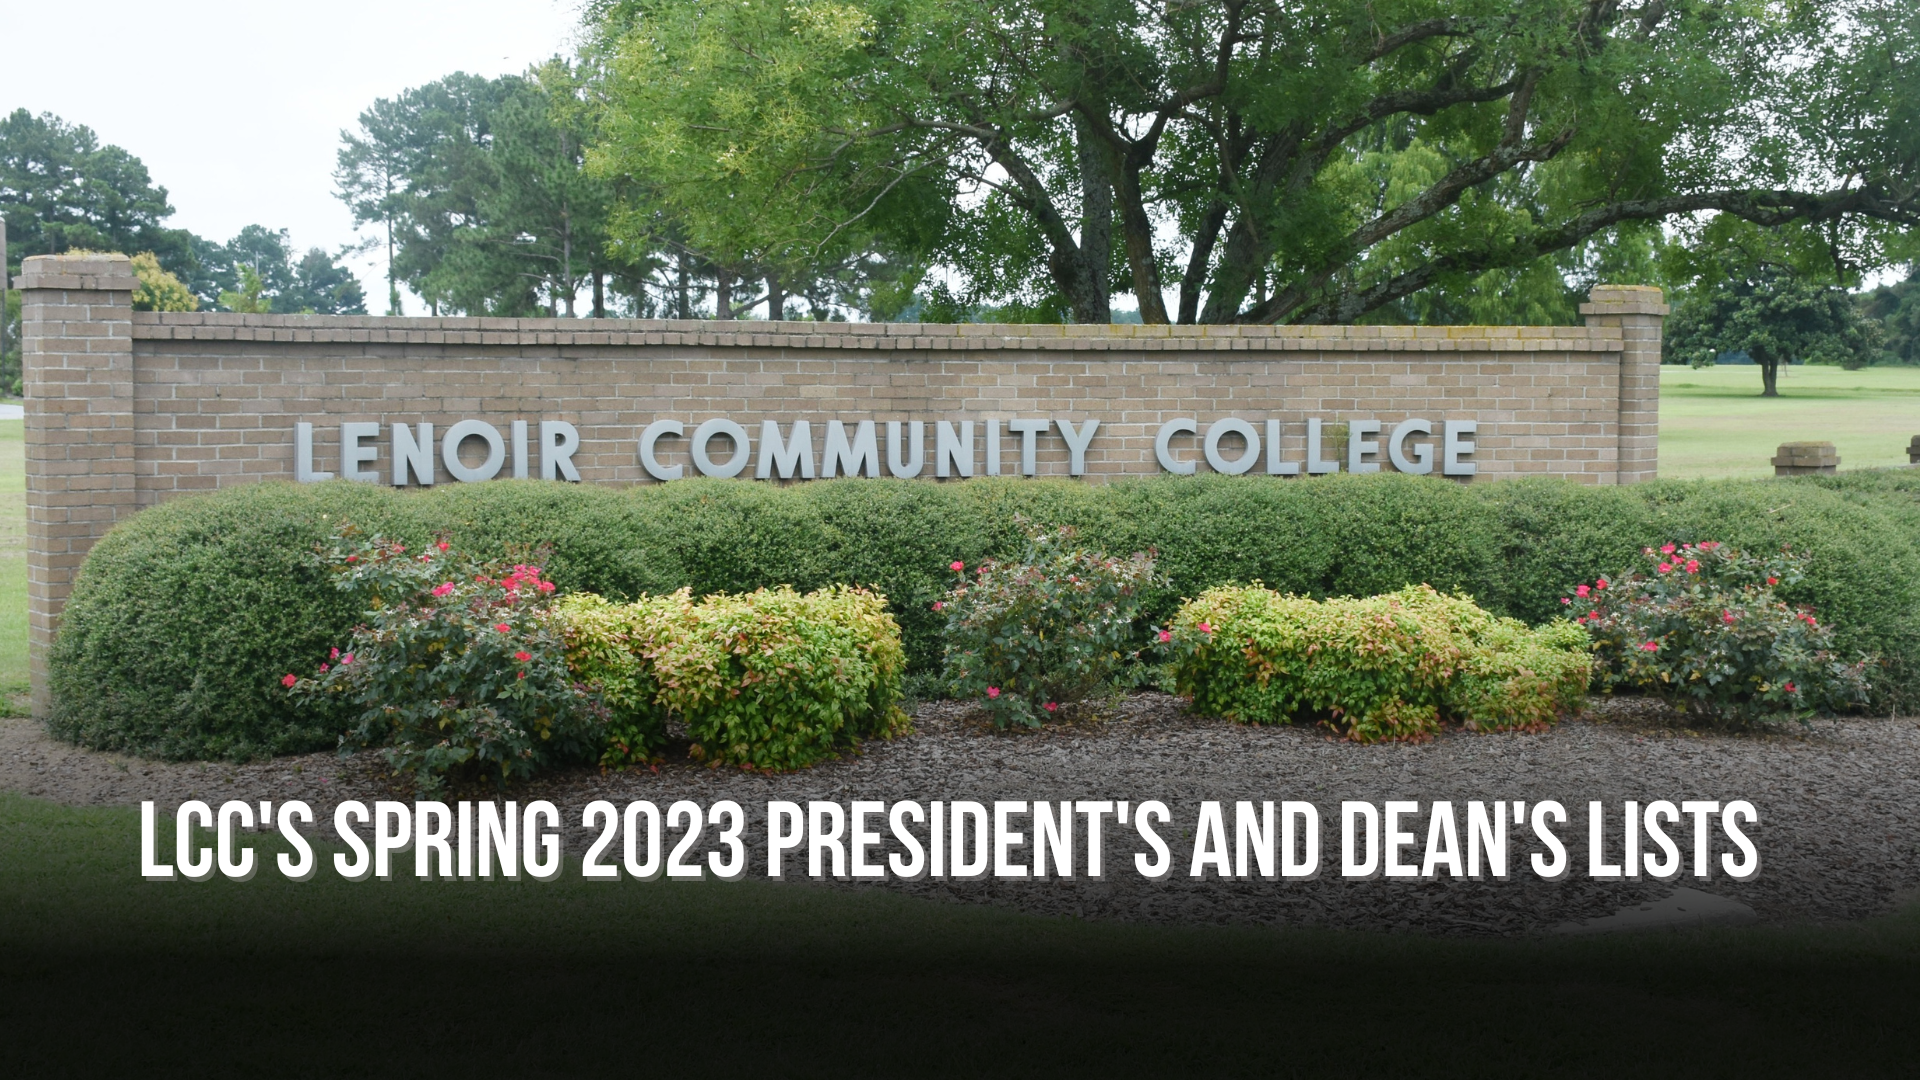 CofC Announces President's List and Dean's List for Spring 2022